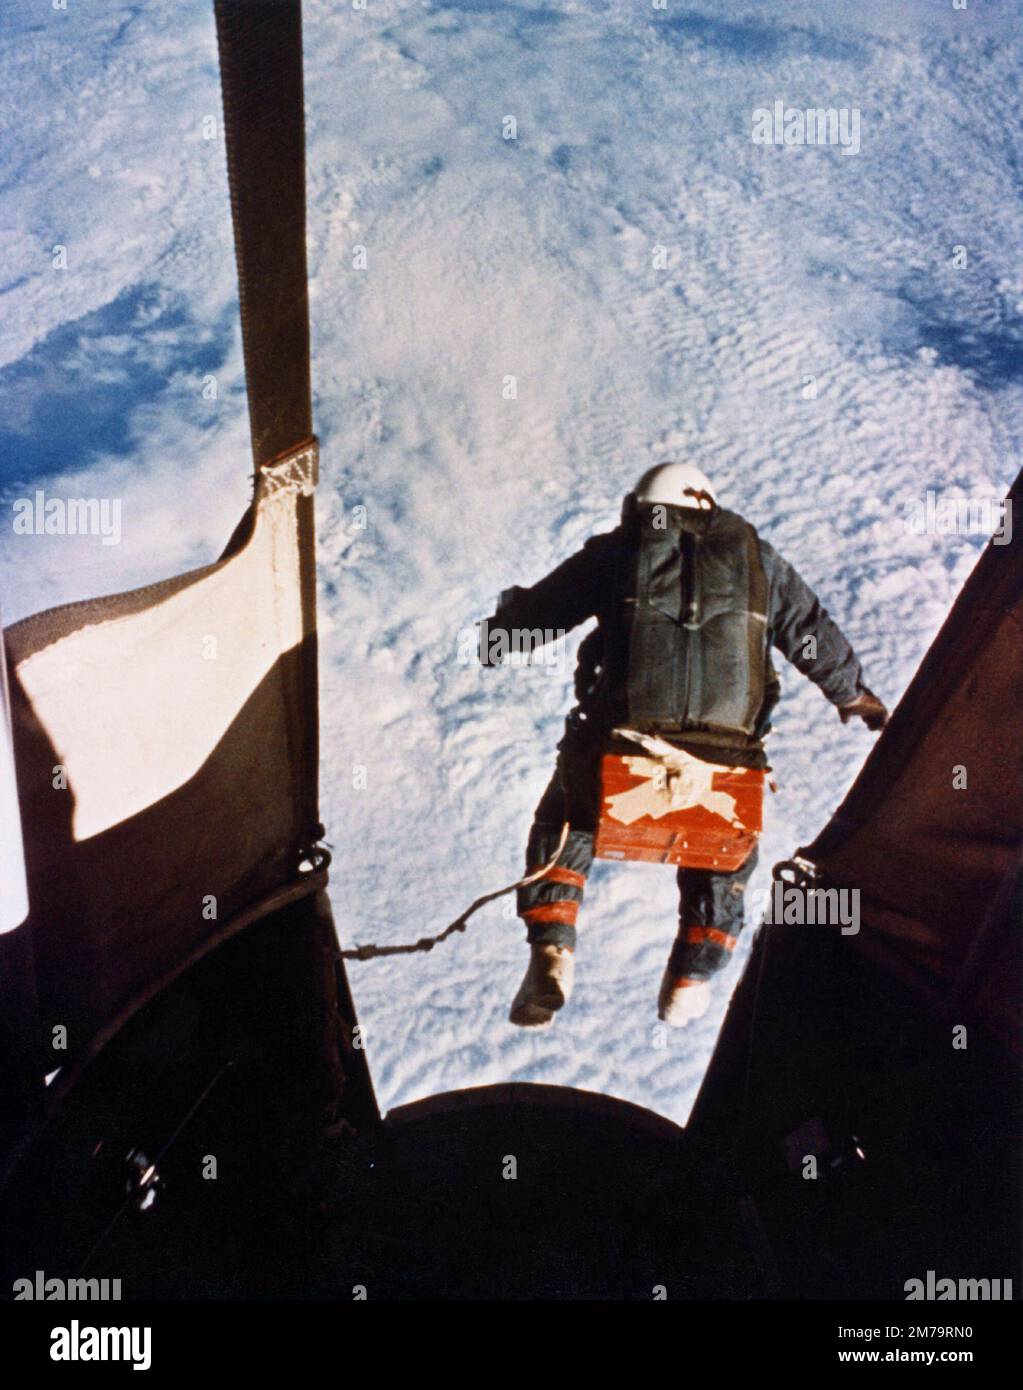 Kittinger's record-breaking skydive from Excelsior III. On Aug. 16, 1960, Col. Kittinger stepped from a balloon-supported gondola at the altitude of 102,800 feet. In freefall for 4.5 minutes at speeds up to 714 mph and temperatures as low as -94 degrees Fahrenheit, he opened his parachute at 18,000 feet. (U.S. Air Force photo) Stock Photo